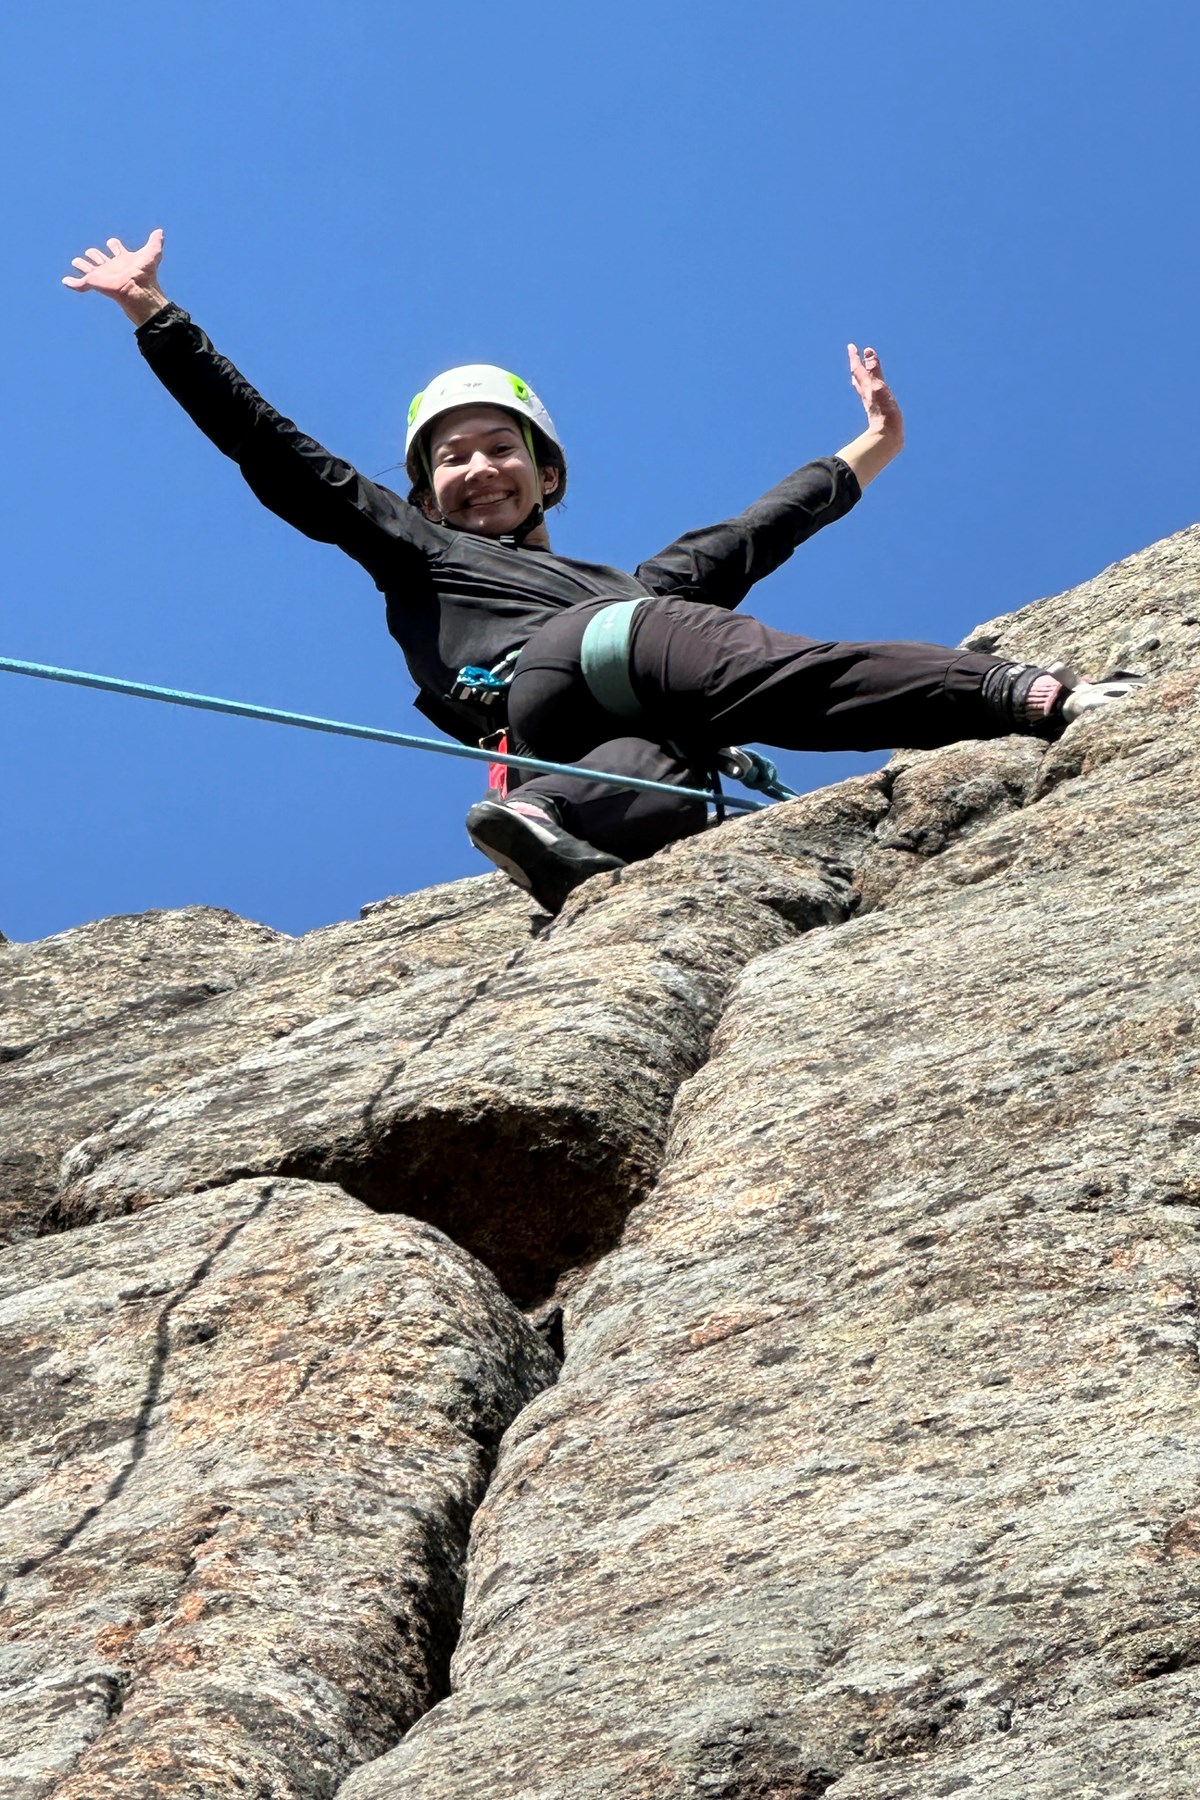 A person spreads their arms and poses for a photo while rock climbing.